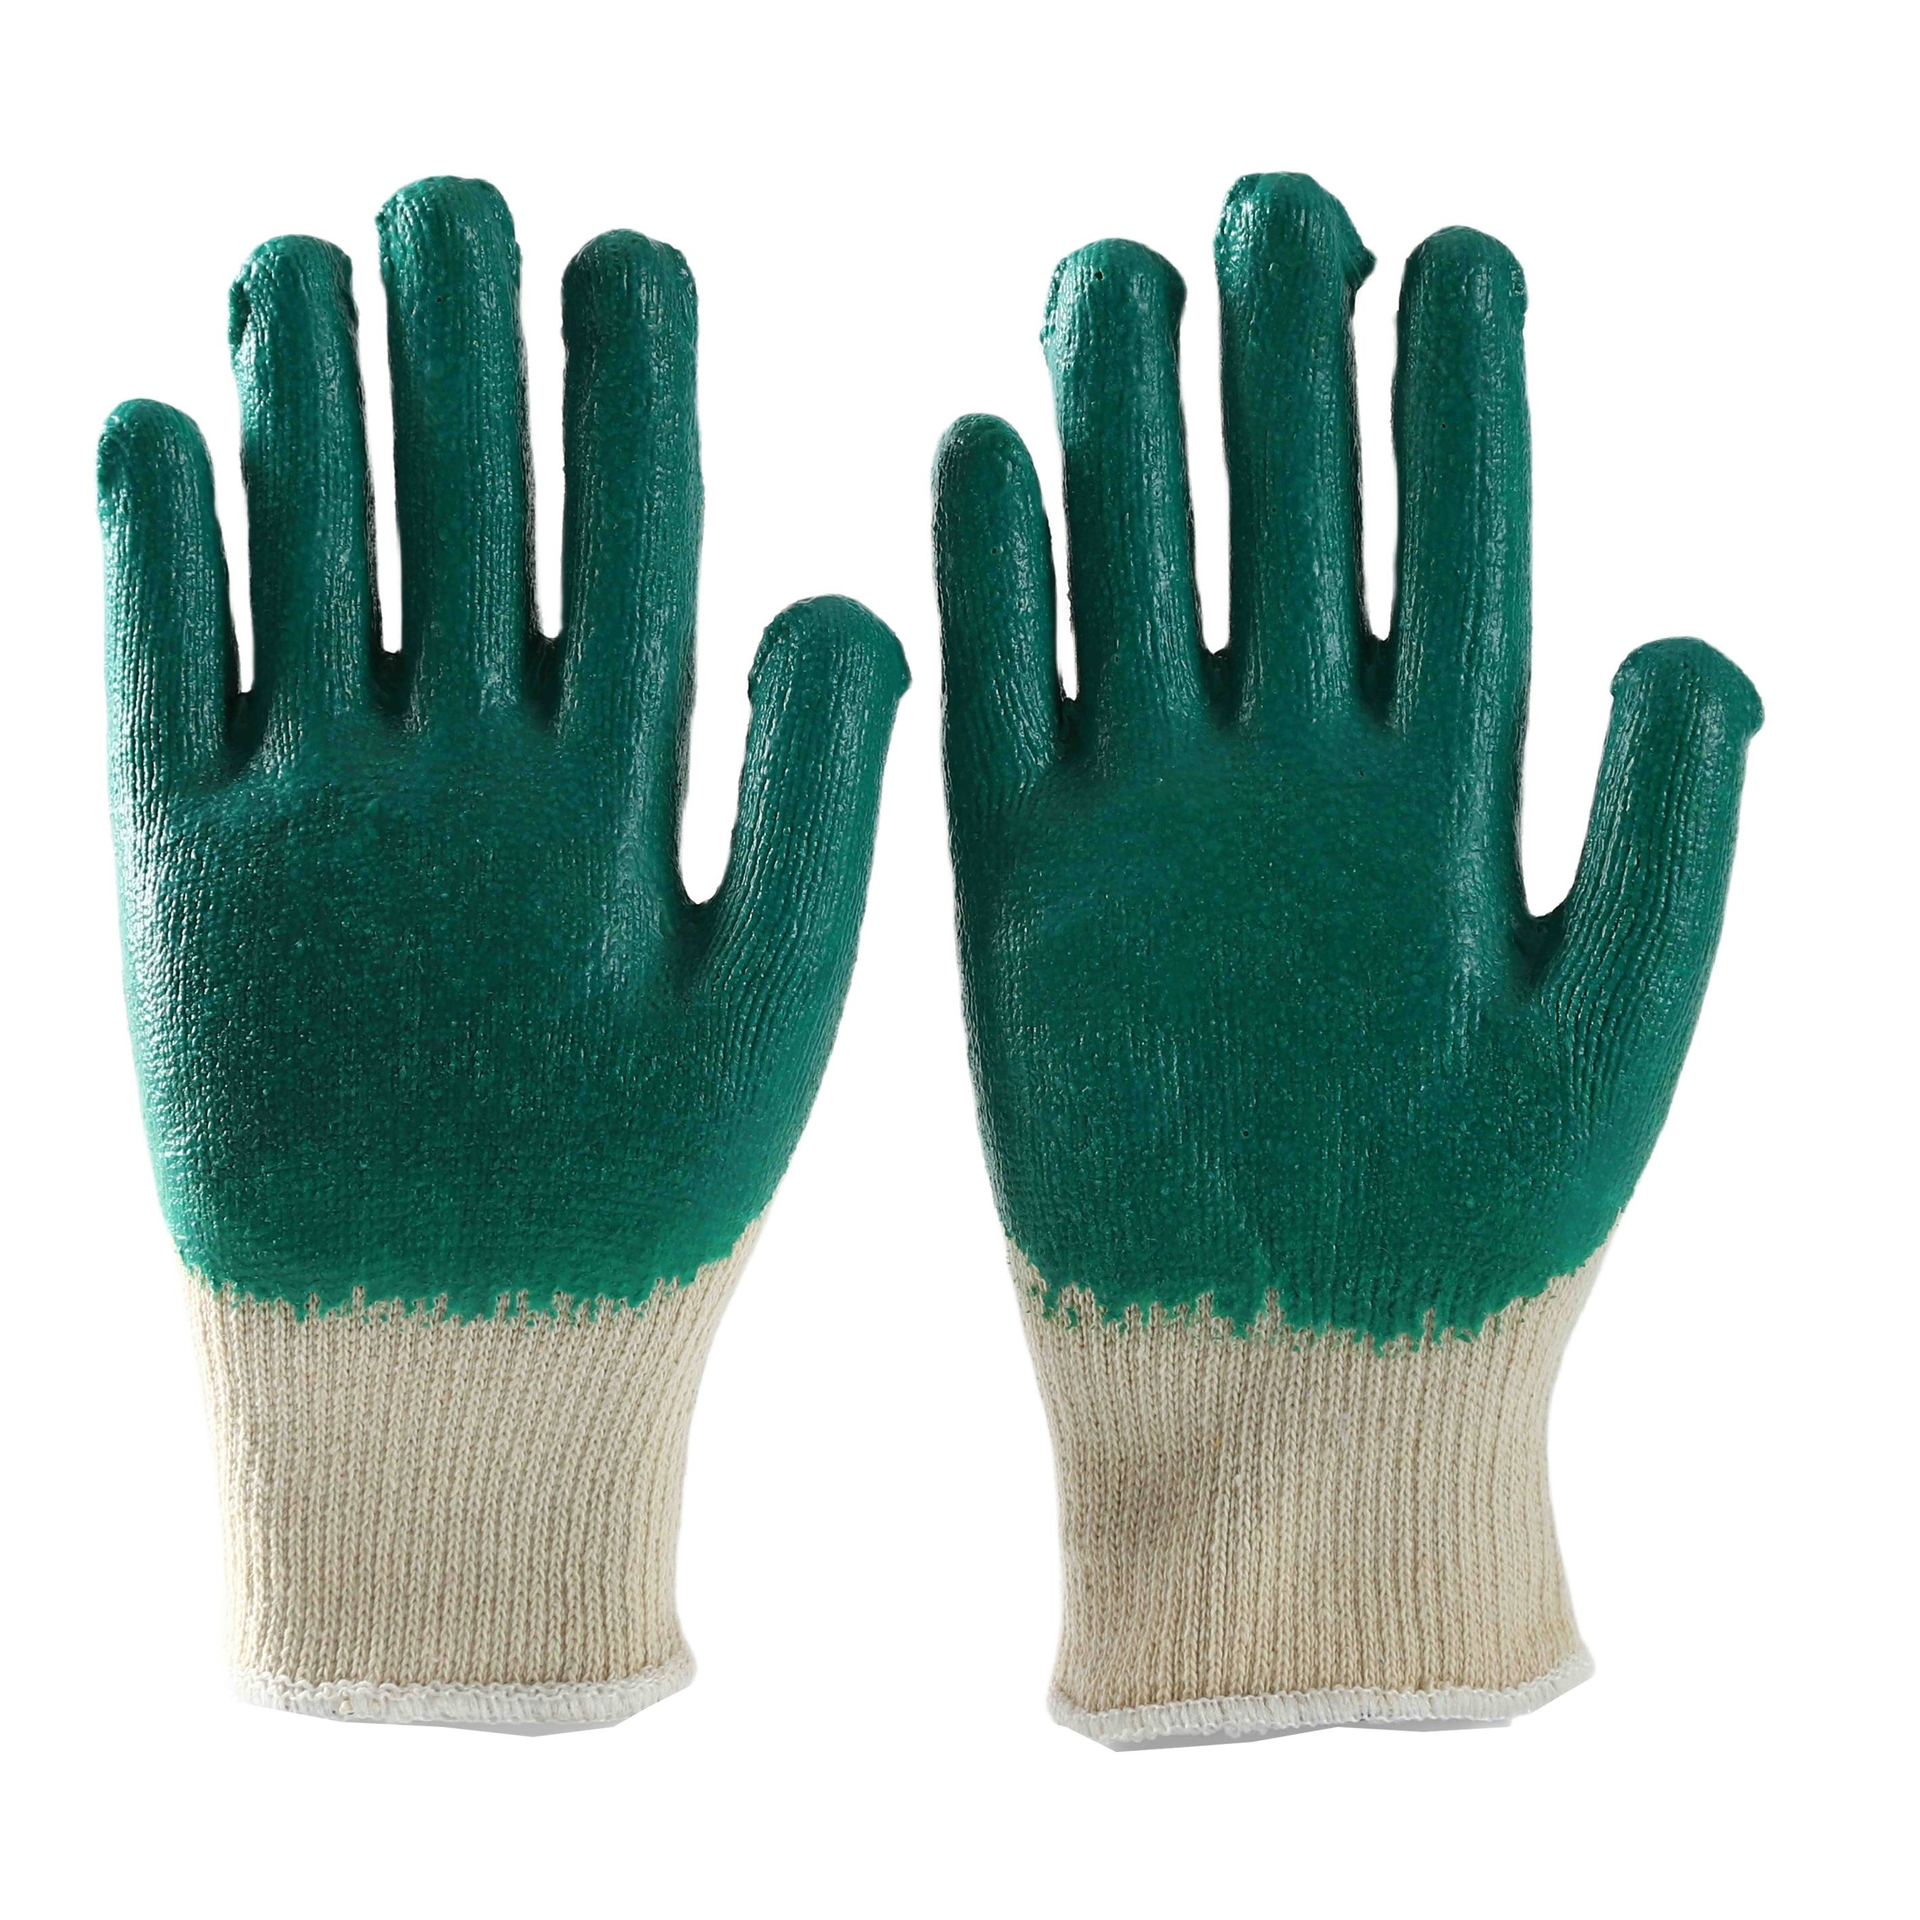                 White cotton with green latex smooth coating gloves            